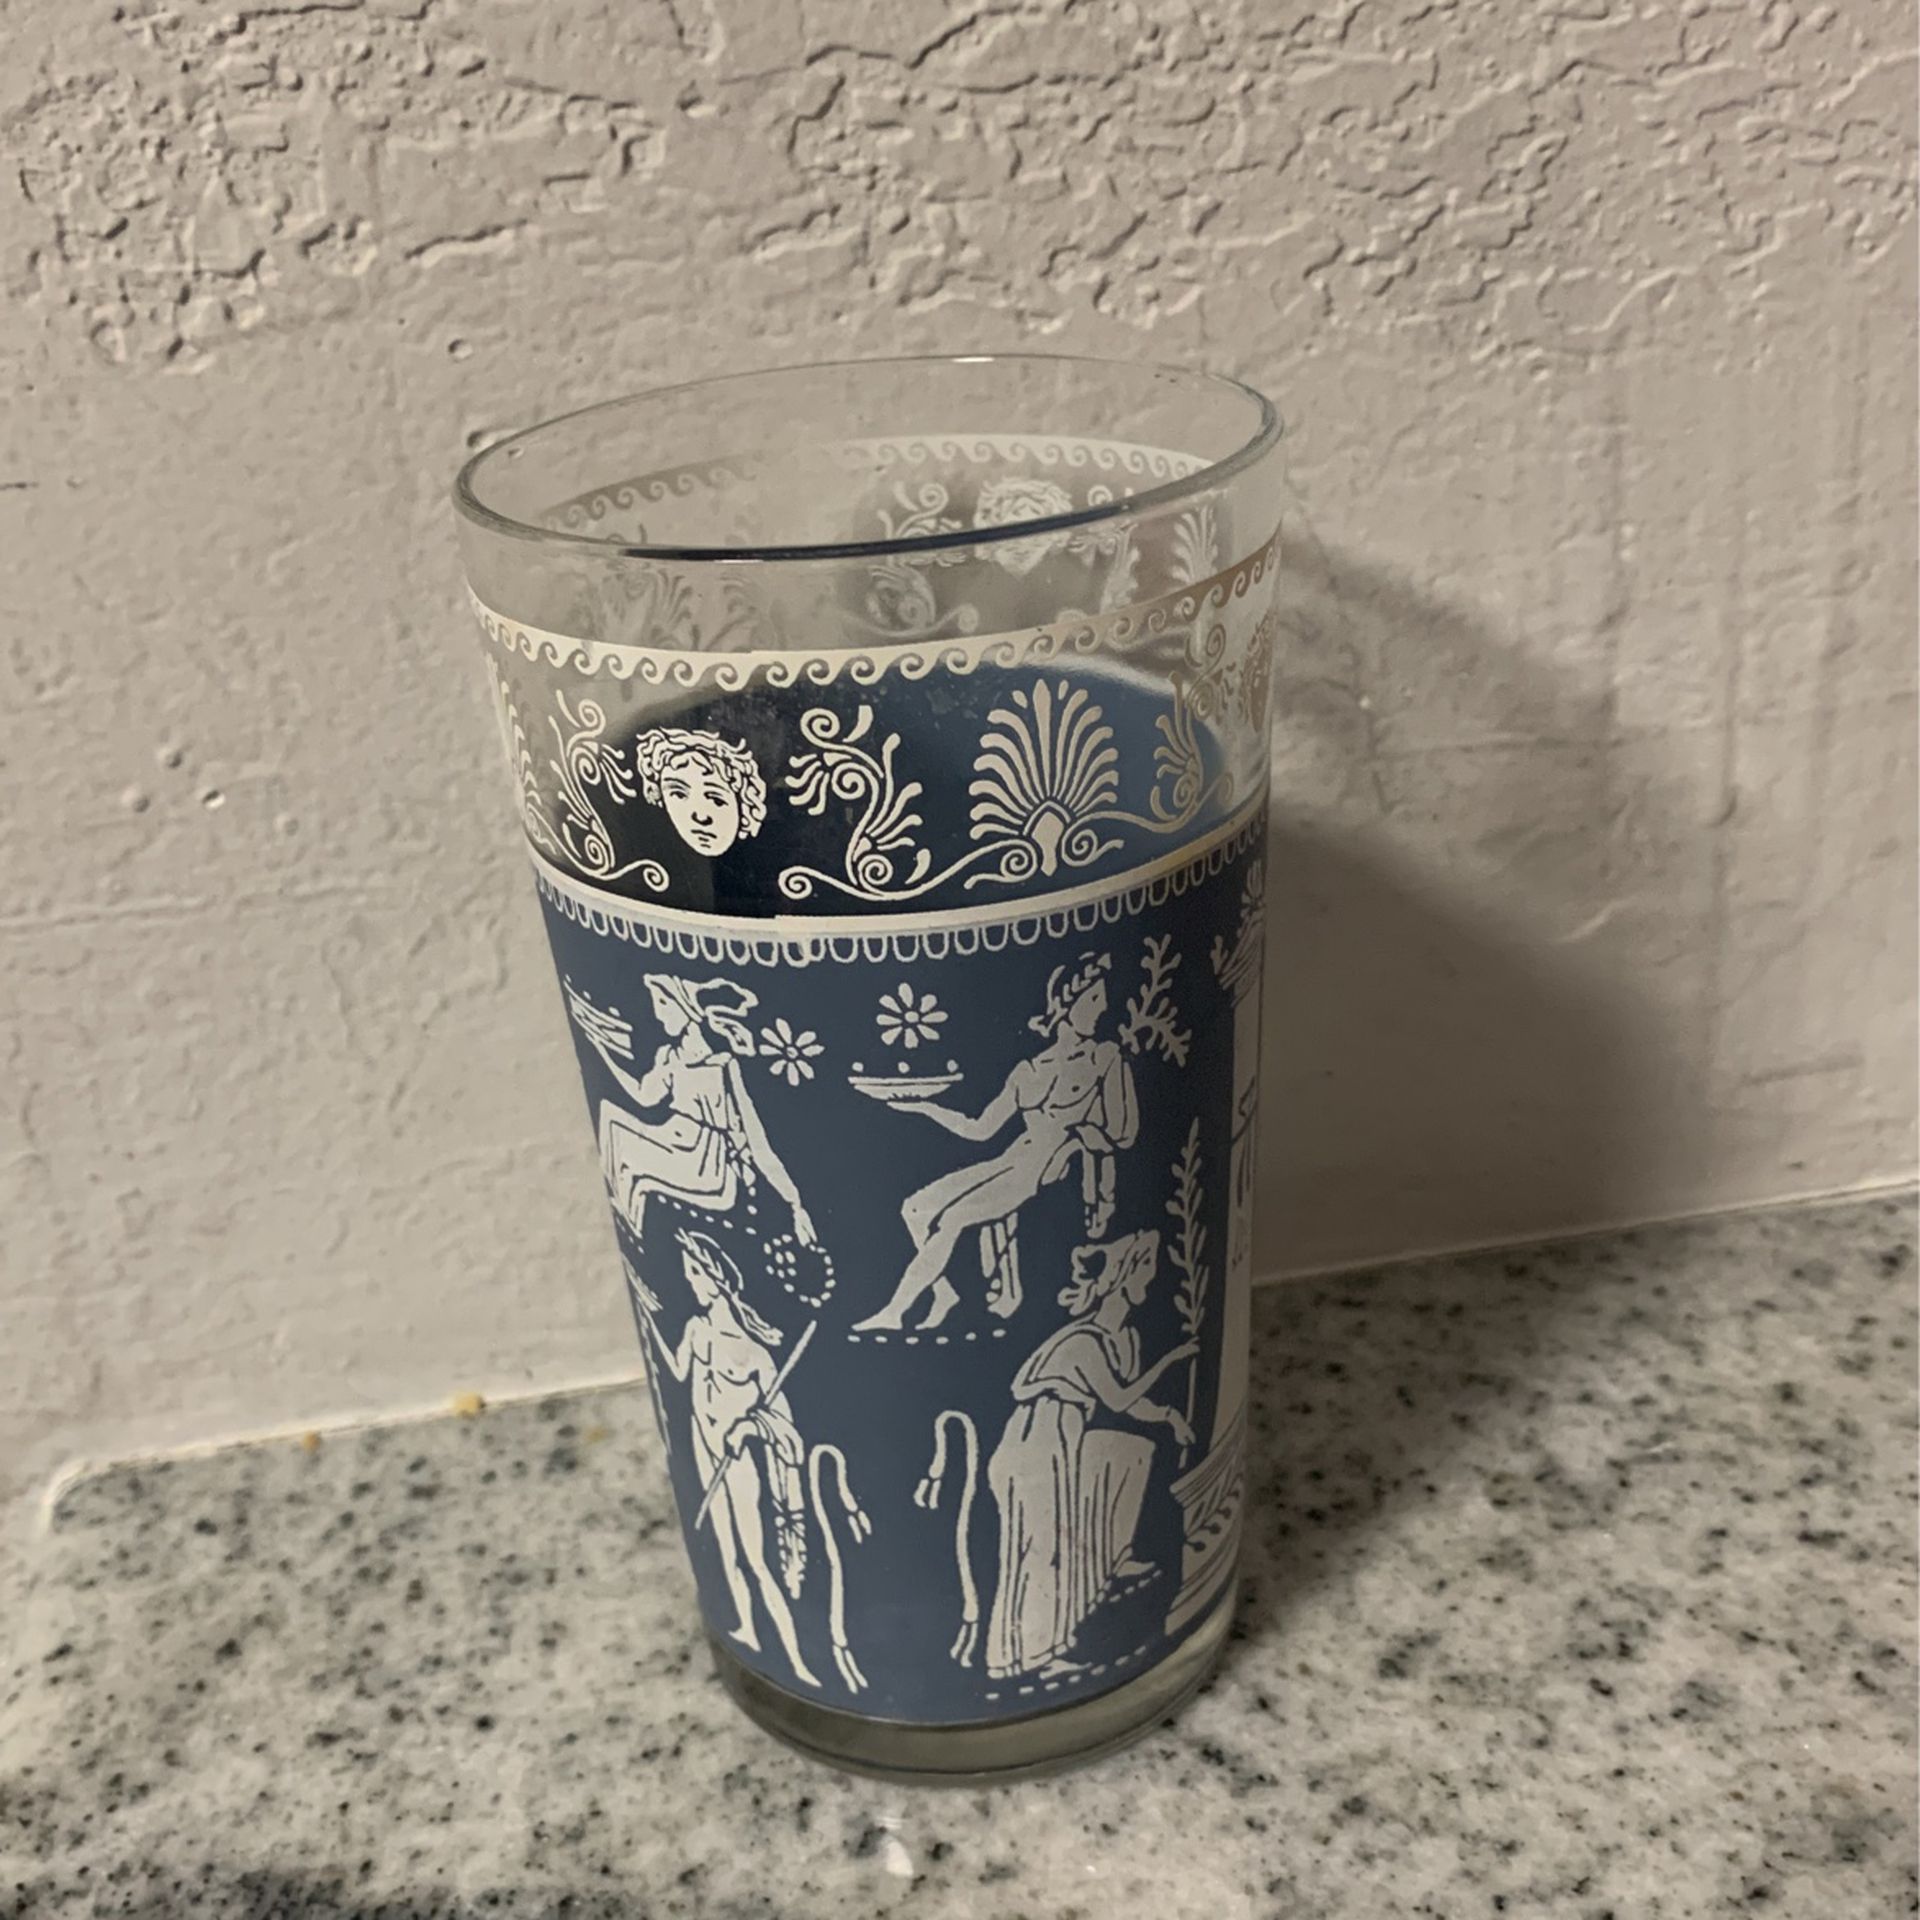 I have four China glasses antique hand printed￼